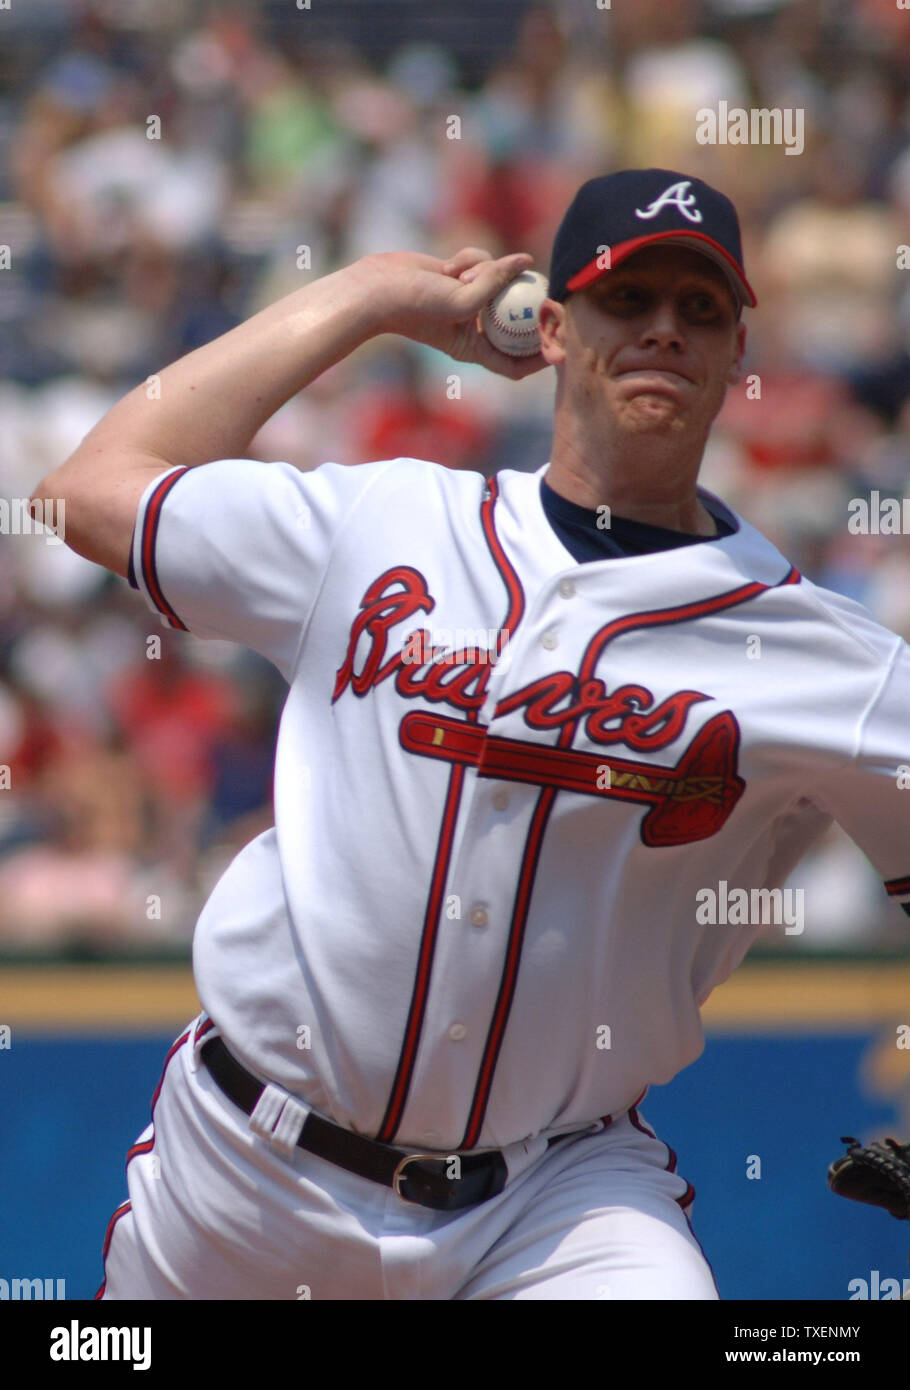 Atlanta Braves relief pitcher Phil Stockman throws against the Boston Red Sox in the sixth inning June 17, 2006, in Atlanta's Turner Field.  The Red Sox defeated the Braves 5-3 (UPI Photo/John Dickerson) Stock Photo